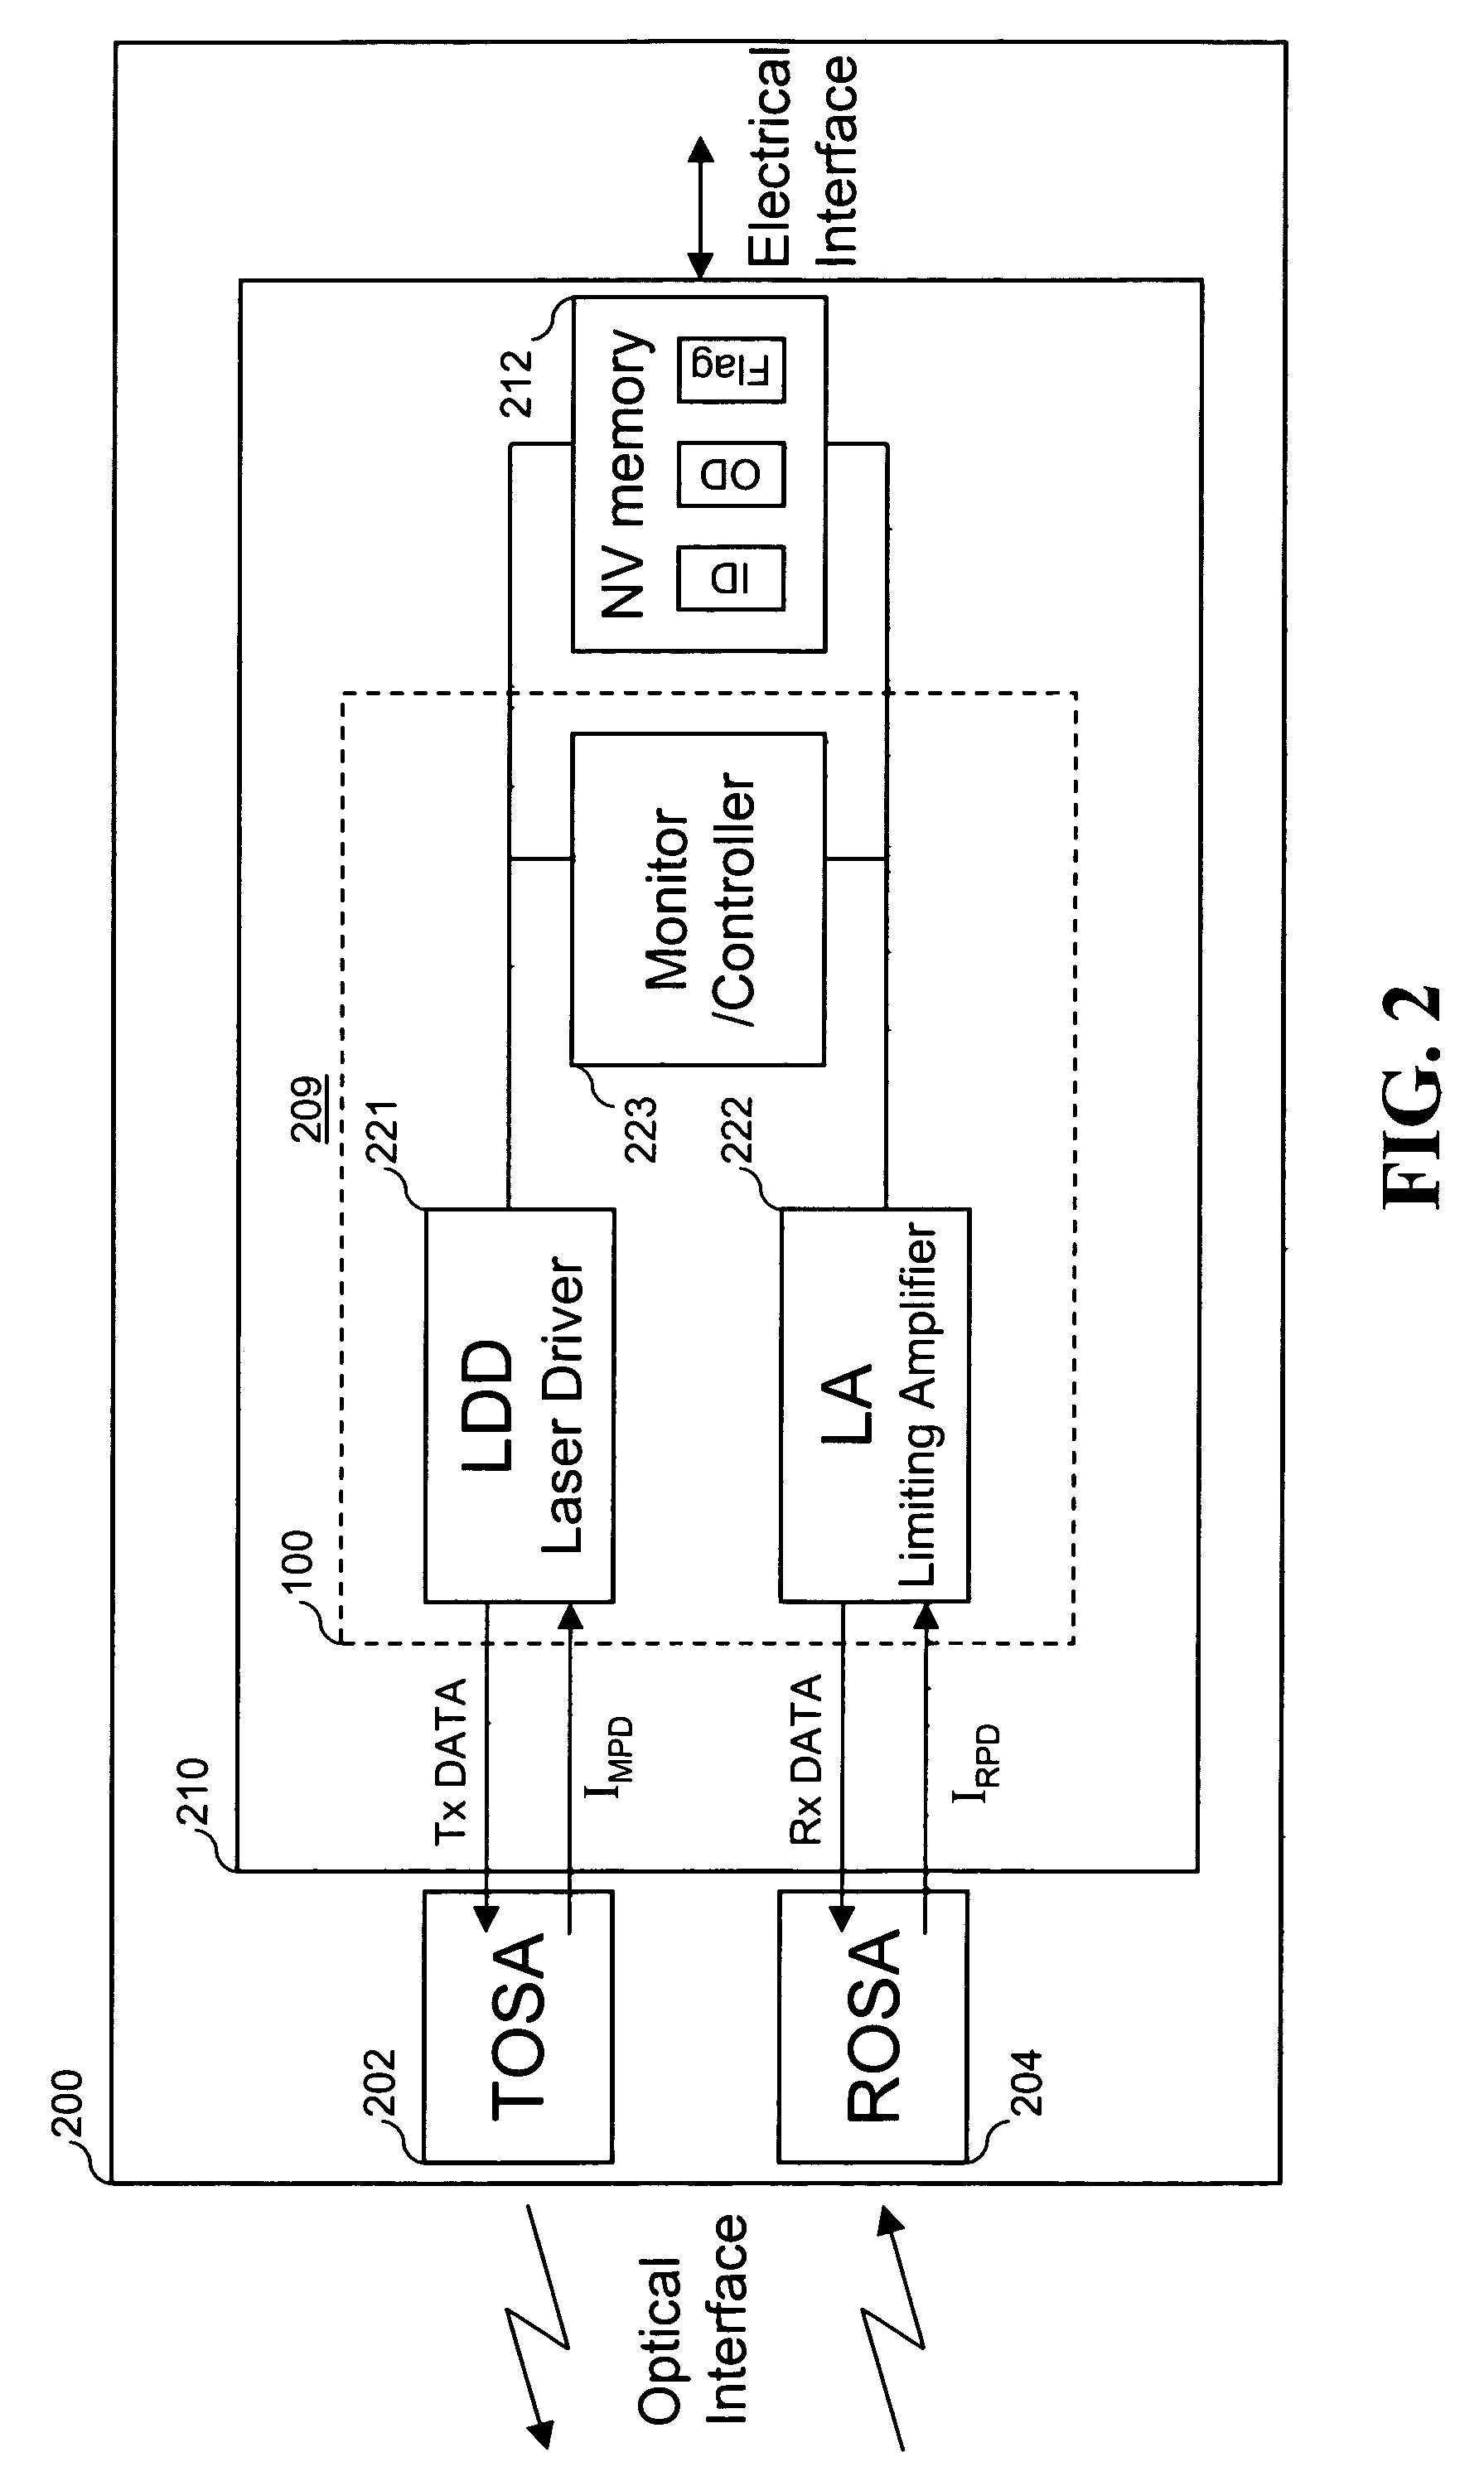 Integrated driving, receiving, controlling, and monitoring for optical transceivers